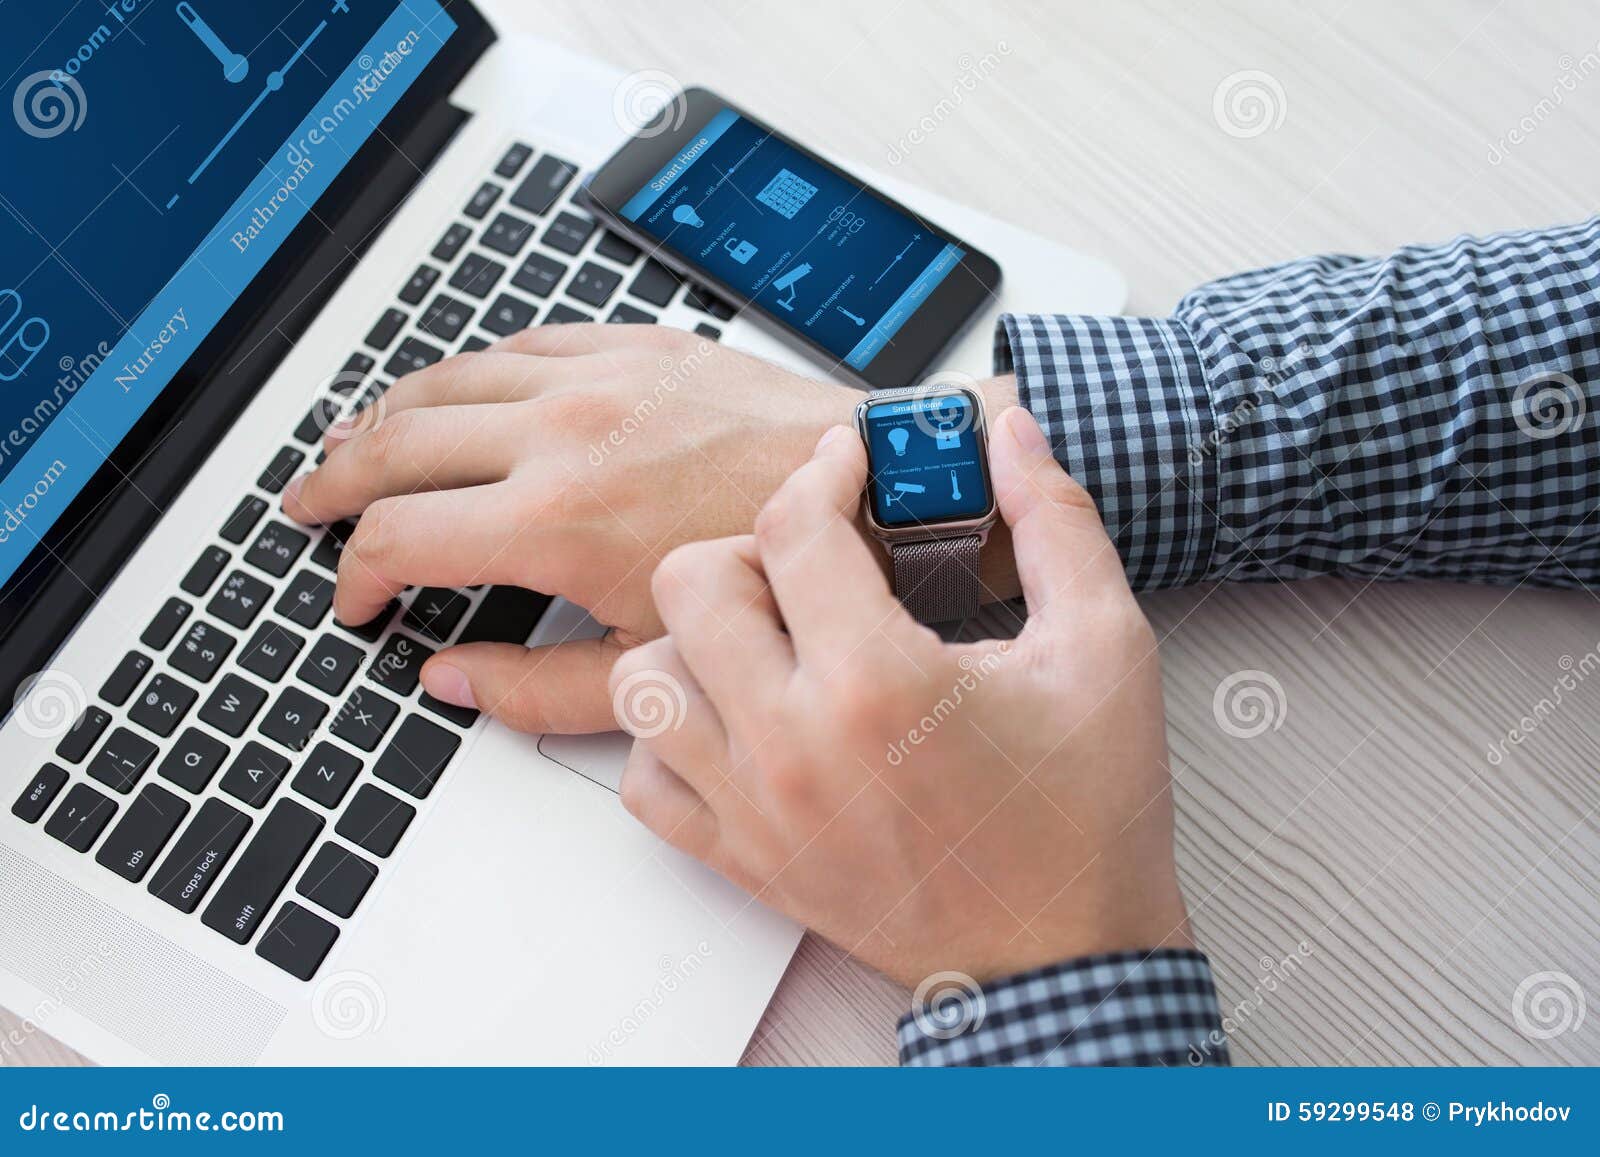 Man Hand In Watch With Smart Home Computer And Phone Stock Photo - Image: 592995481300 x 957